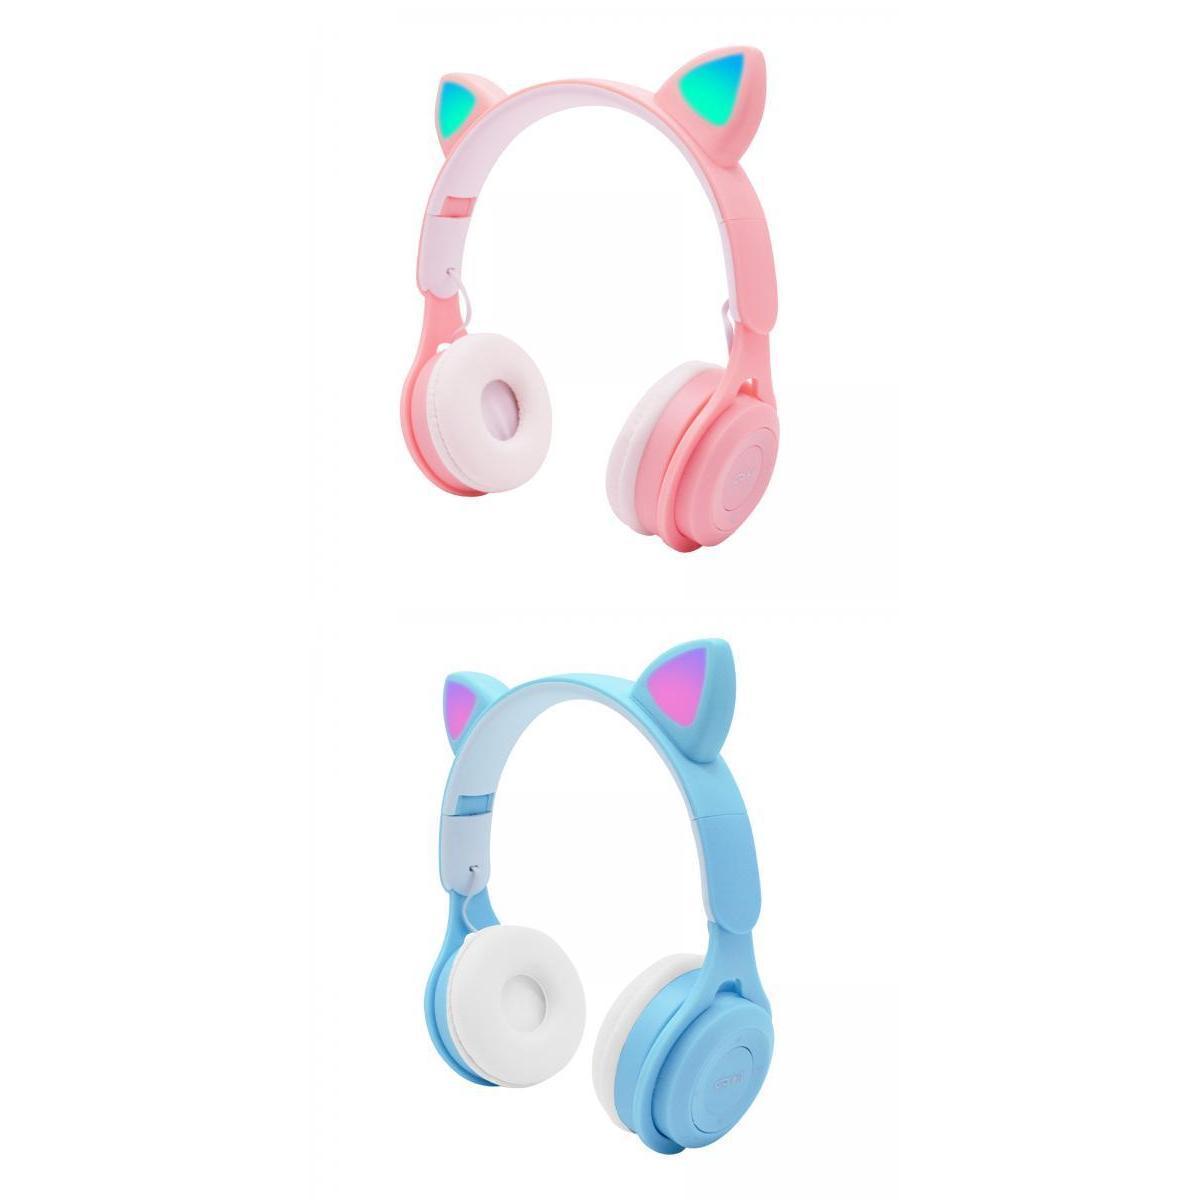 2 Sets Cat Ear LED Light Up Wireless Foldable Headphones Over Ear with Mic